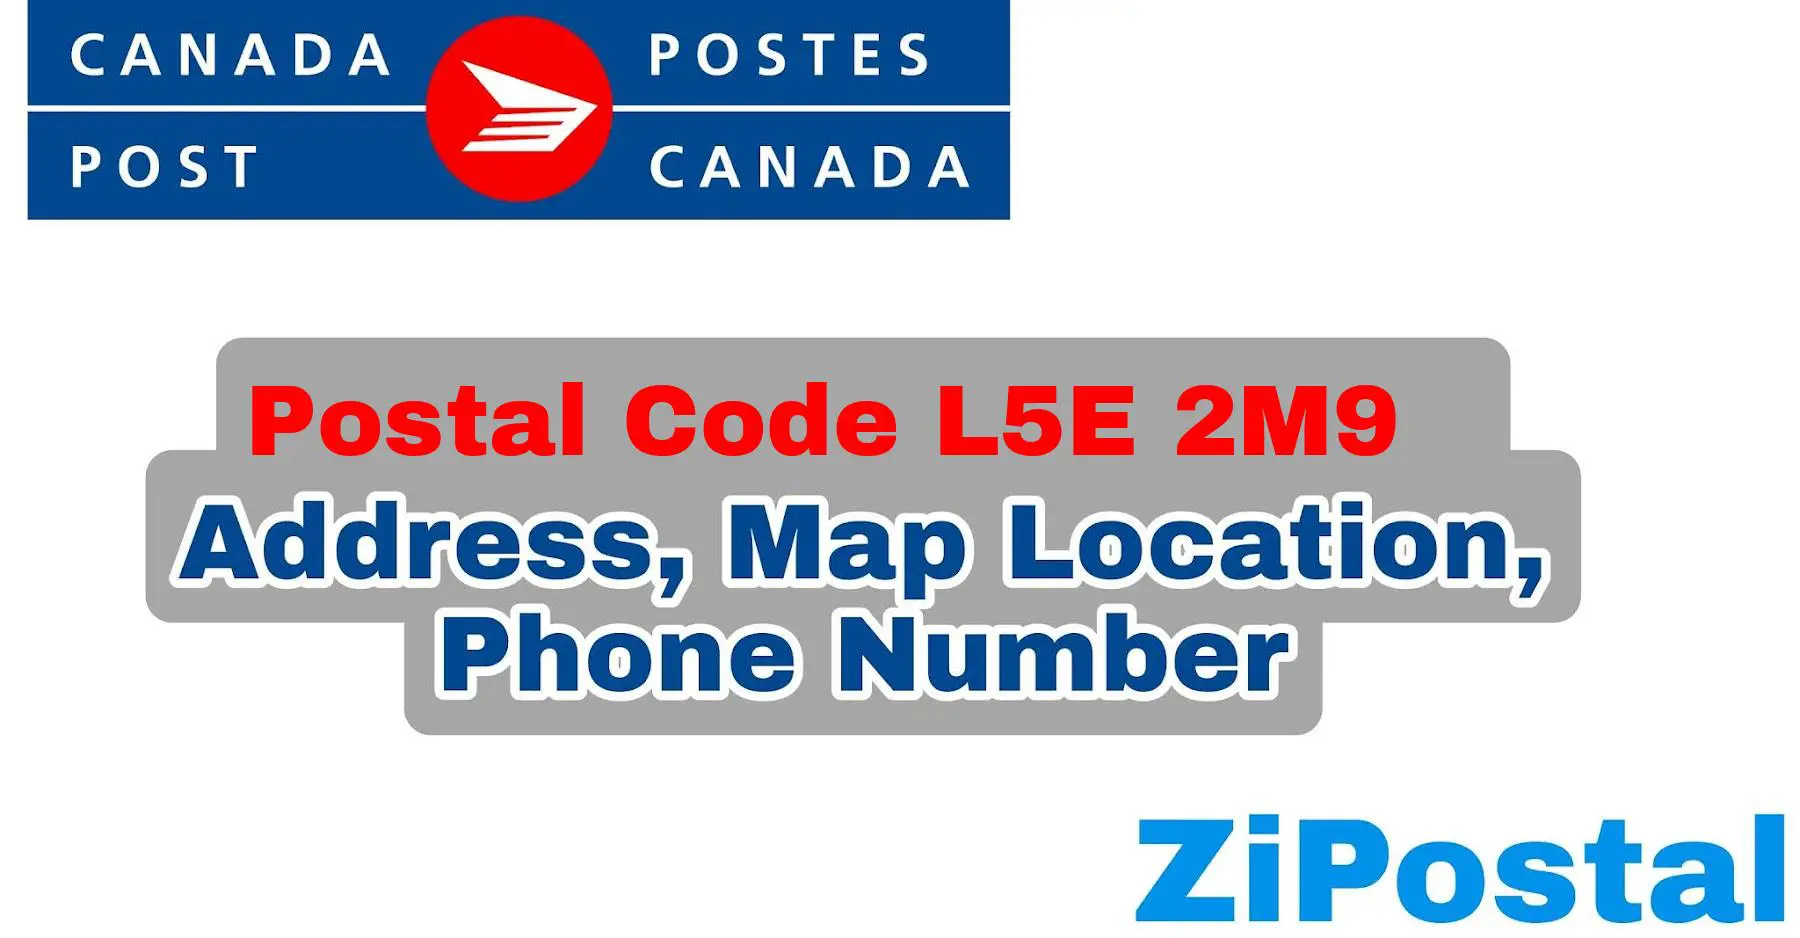 Postal Code L5E 2M9 Address Map Location and Phone Number